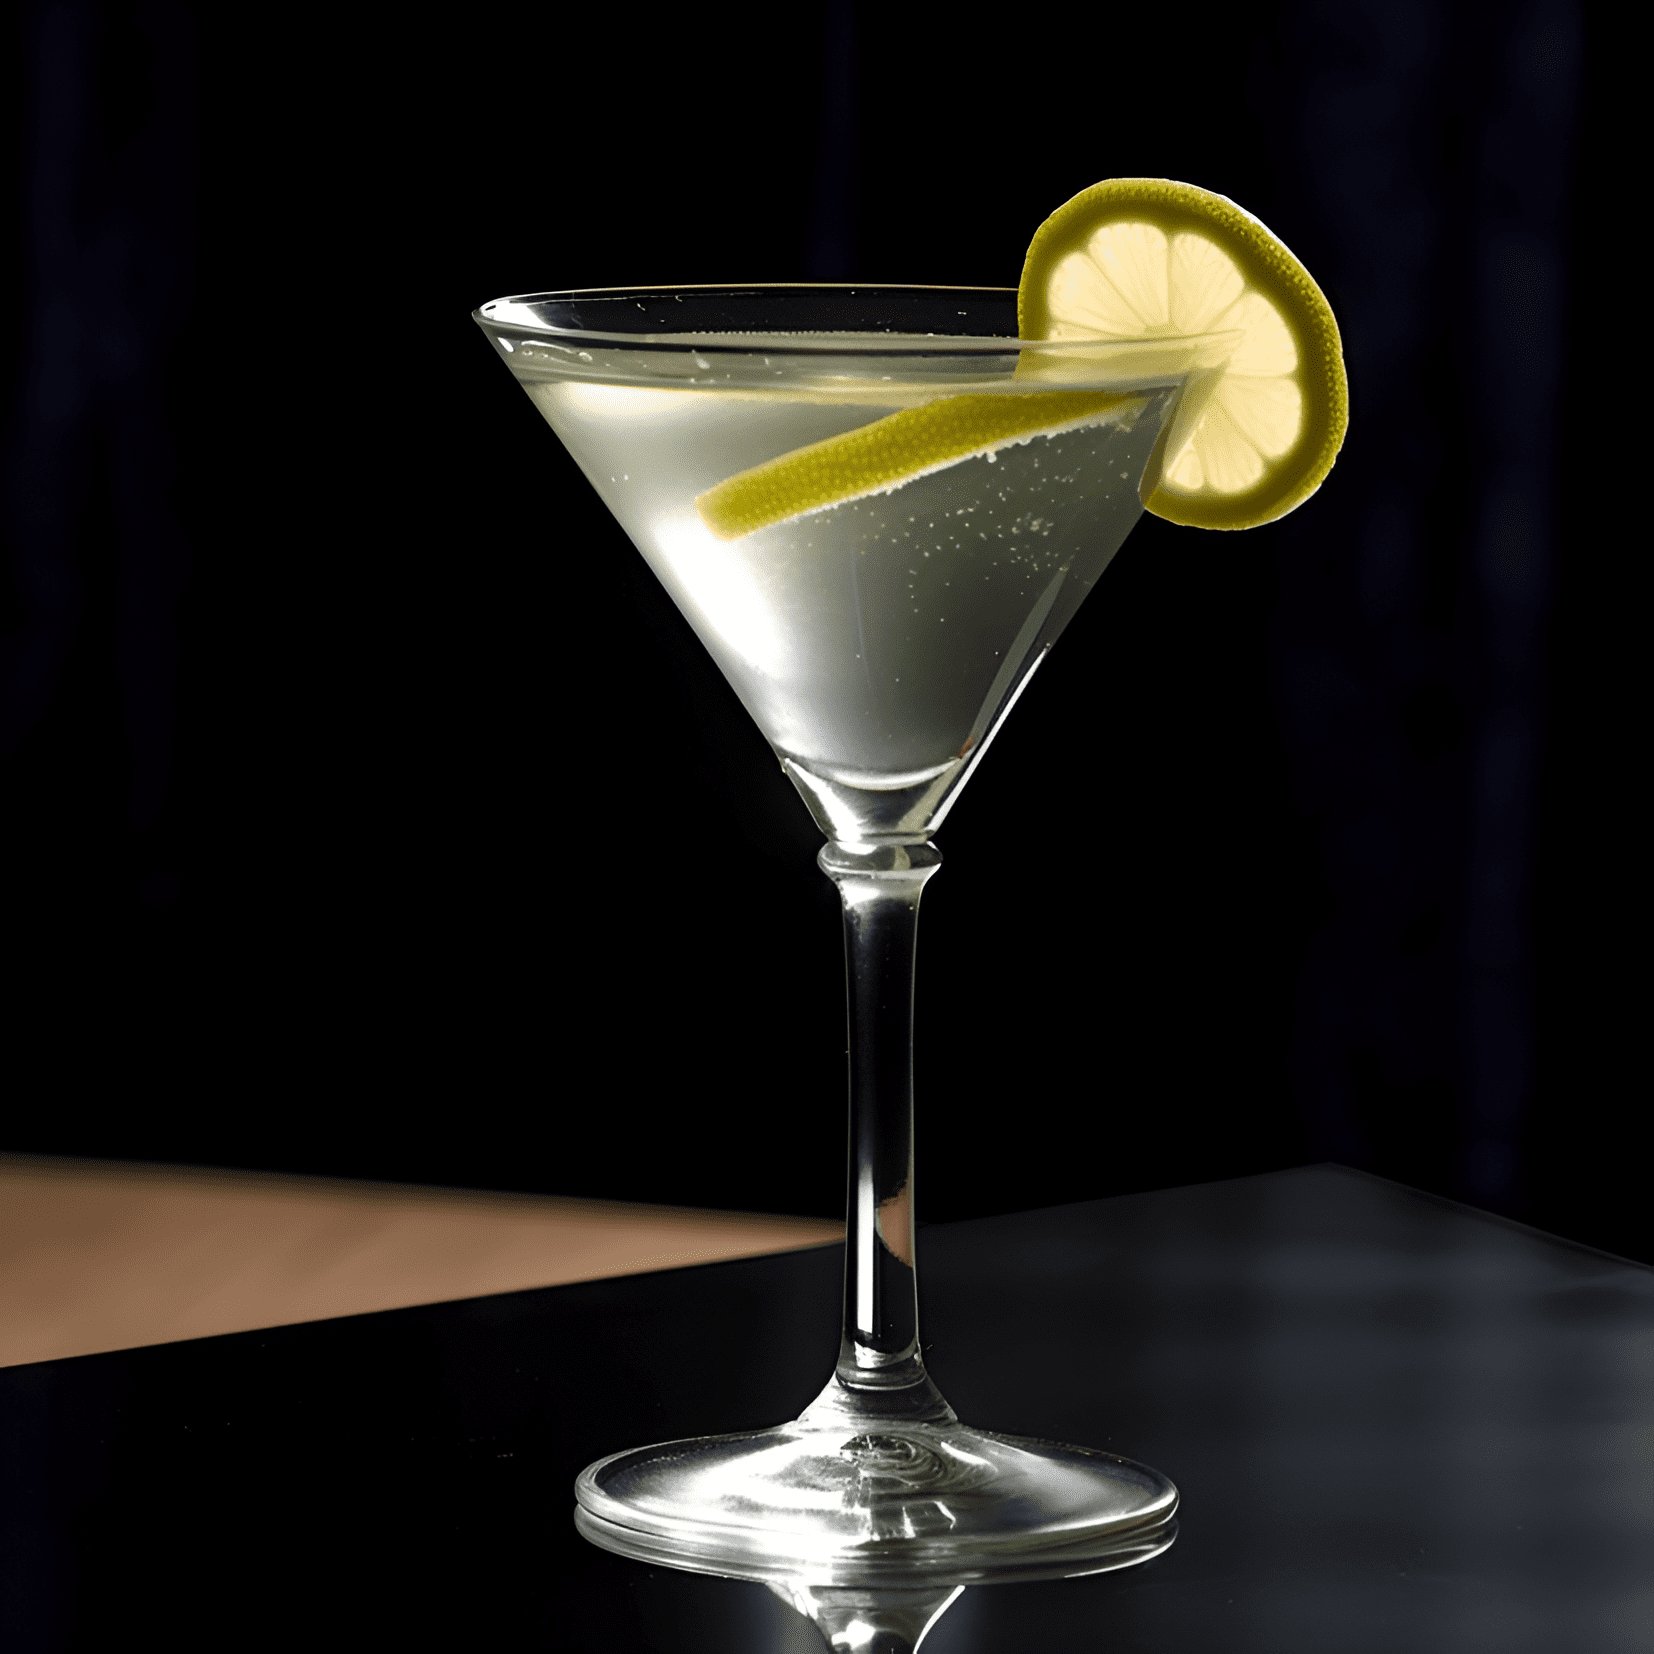 Saketini Cocktail Recipe - The Saketini has a delicate, smooth, and slightly floral taste with hints of juniper and citrus. It is a well-balanced cocktail that is neither too sweet nor too sour, with a light and refreshing finish.